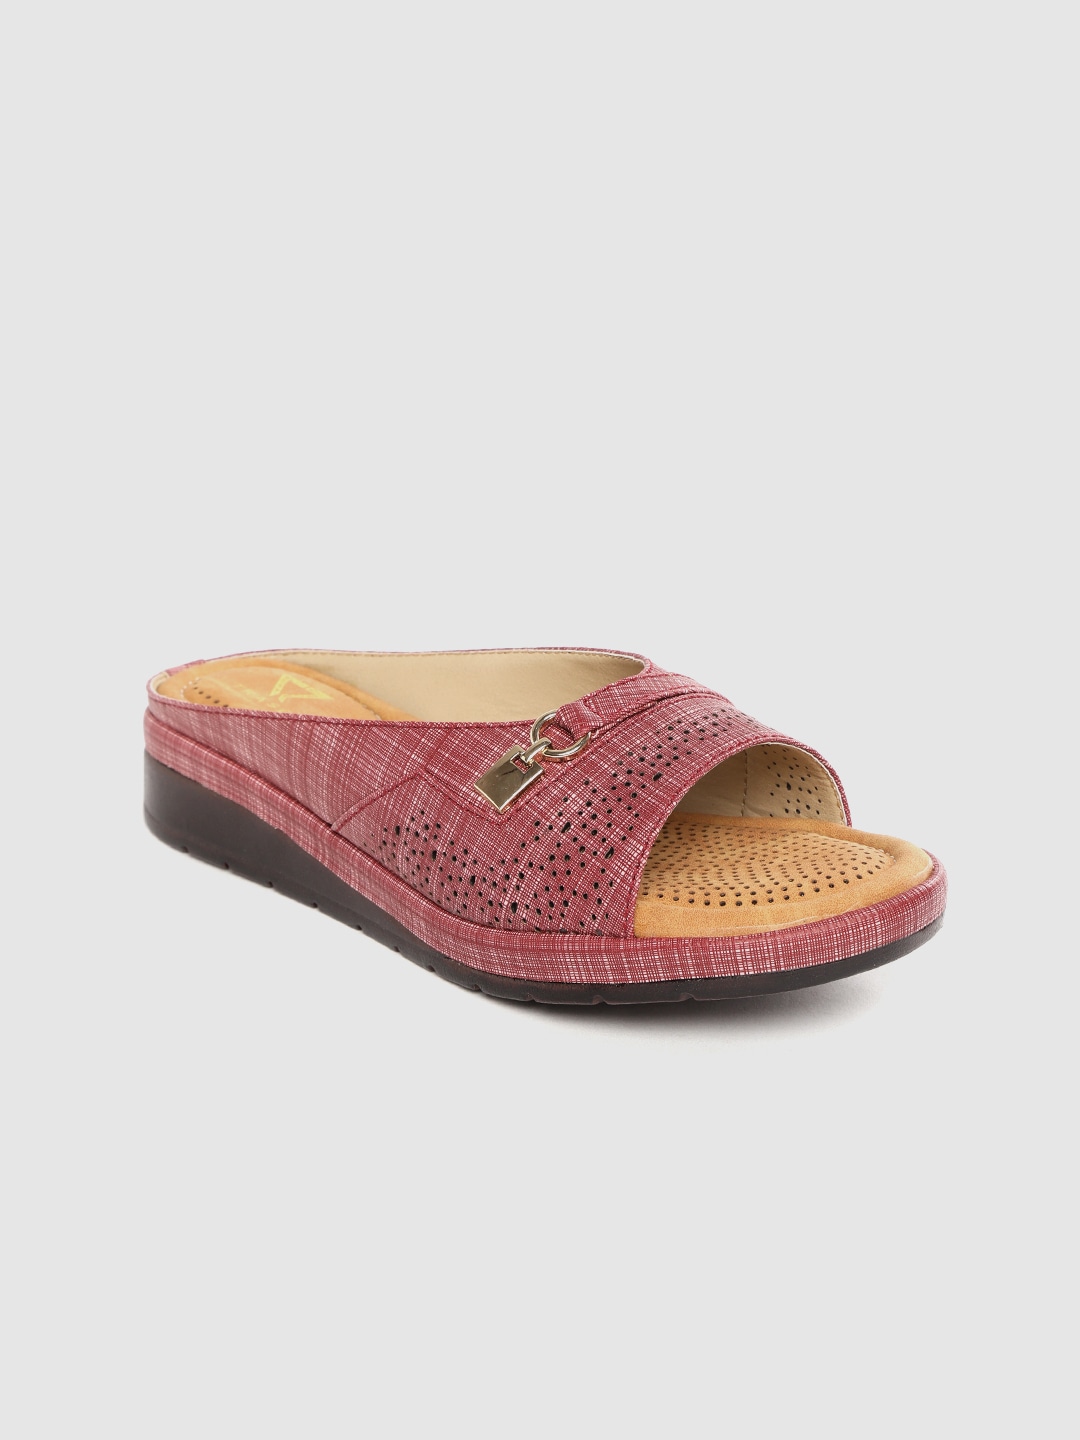 TRASE Women Maroon & Pink Checked Comfort Heels Price in India